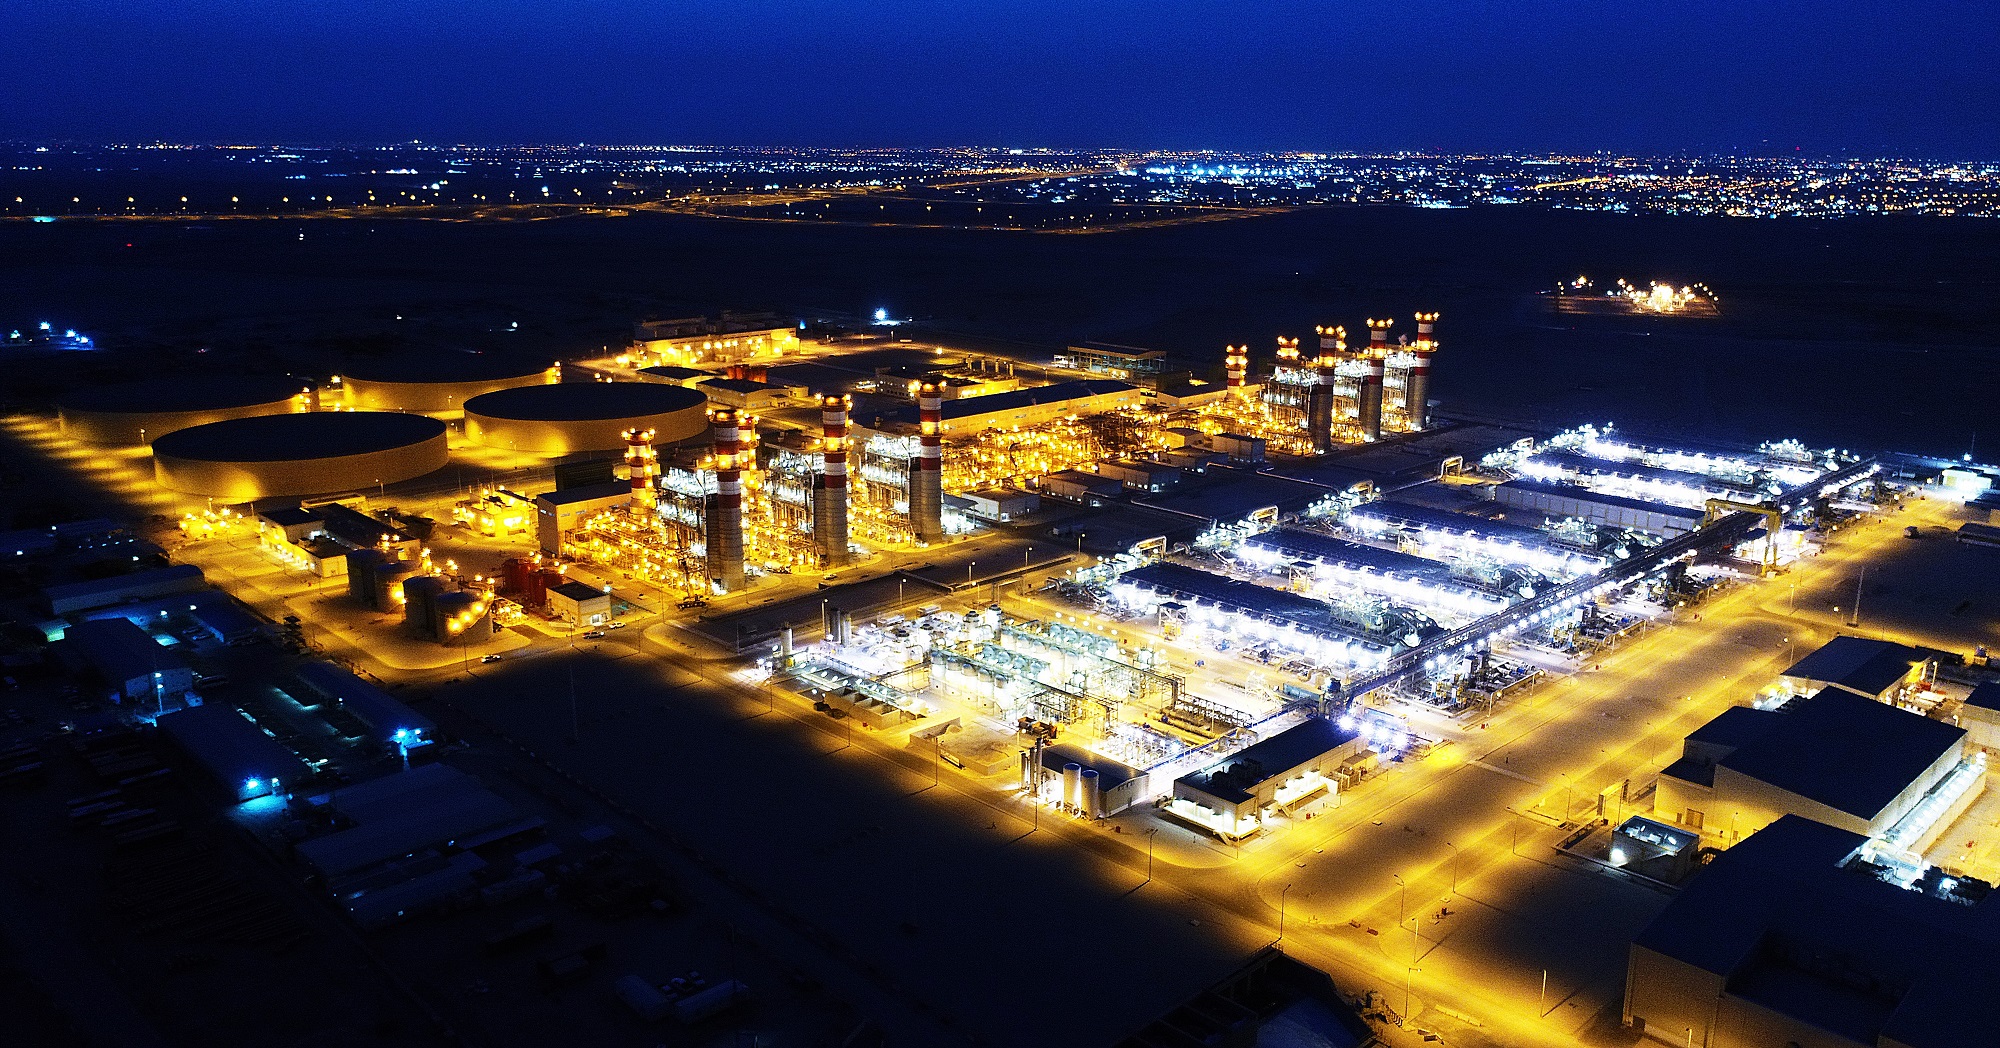 The Qatar’s Umm Al Houl desalination plant supplies 564mn liters of potable water per day.